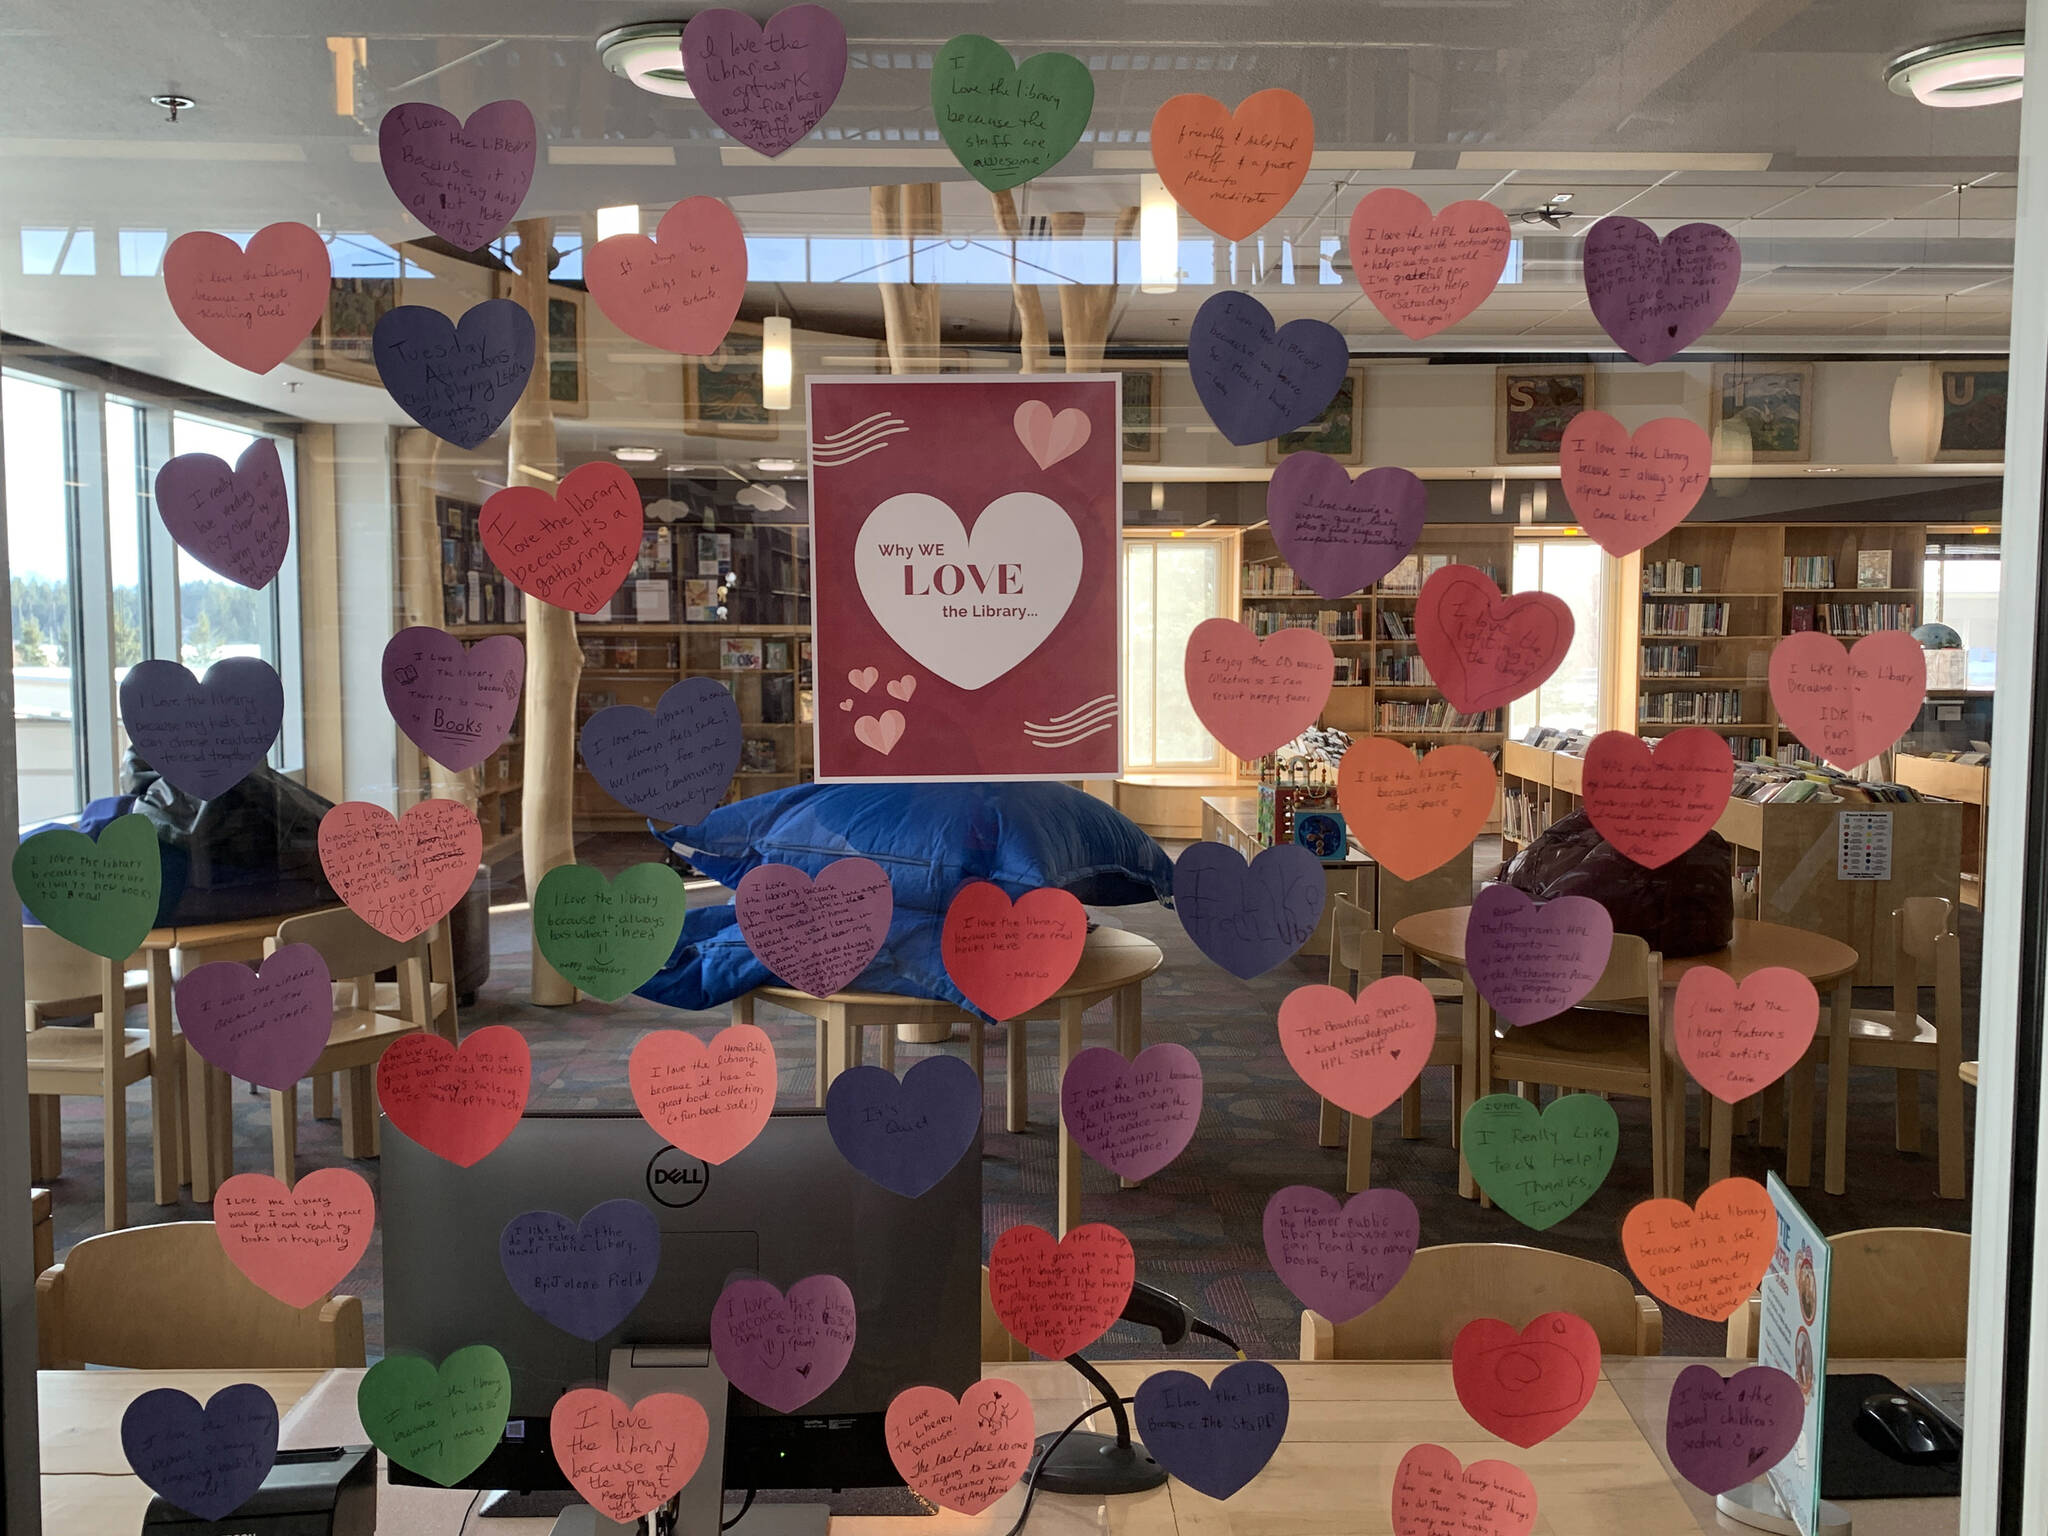 “Why We Love the Library” is on display at the Homer Public Library on Wednesday<ins>, March 15, 2023 in Homer, Alaska</ins>. Photo by Christina Whiting